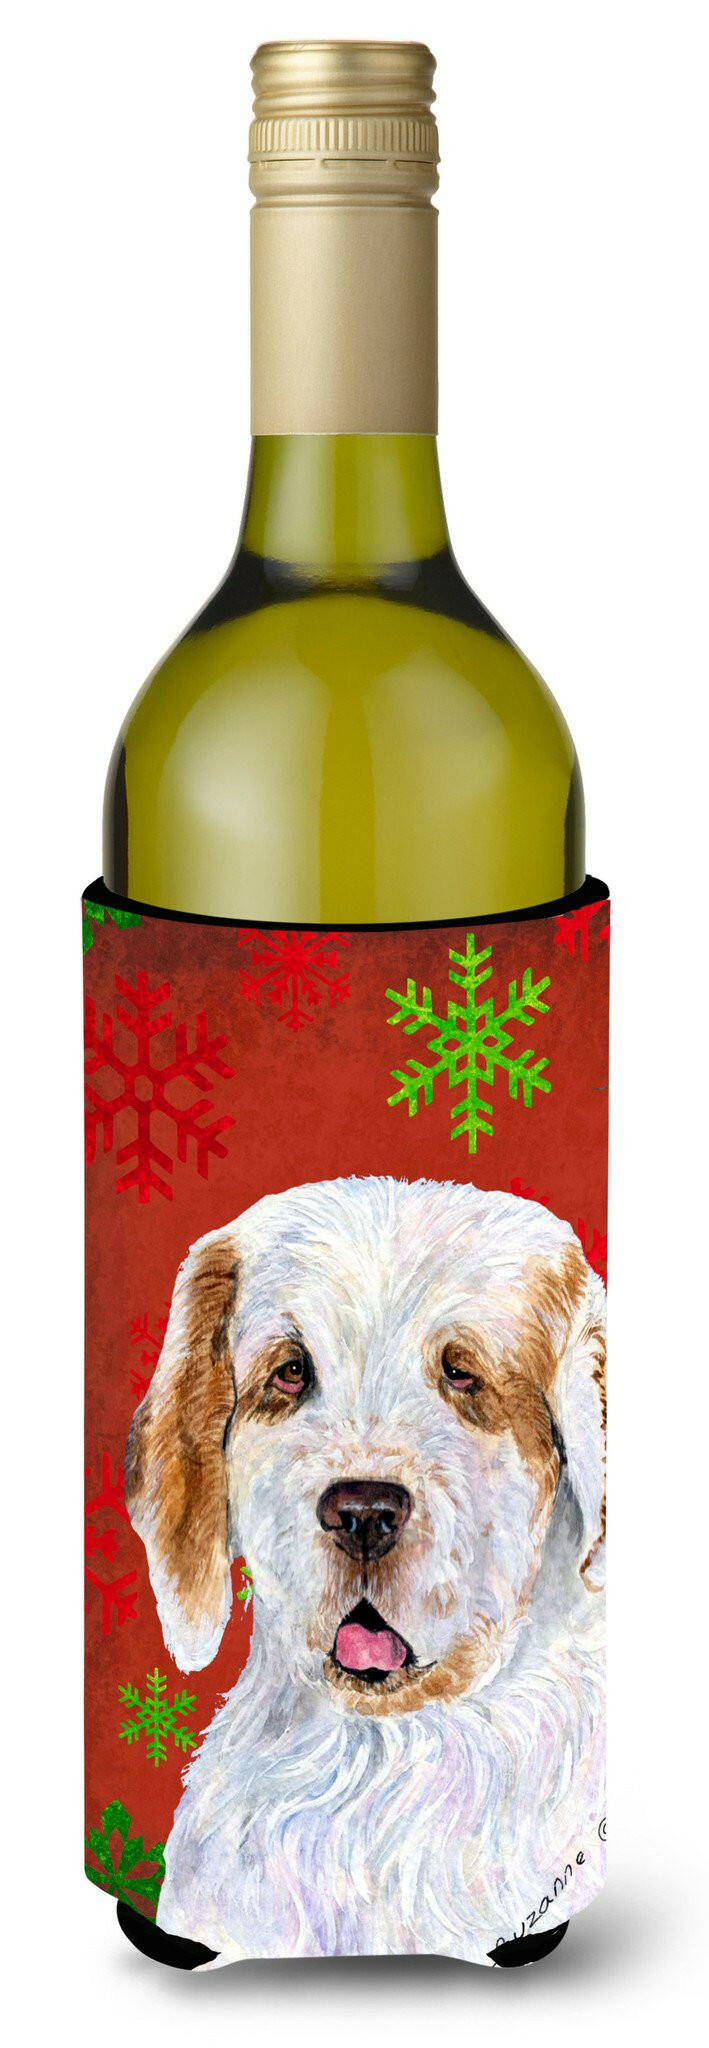 Clumber Spaniel Red and Green Snowflakes Holiday Christmas Wine Bottle Beverage Insulator by Caroline's Treasures